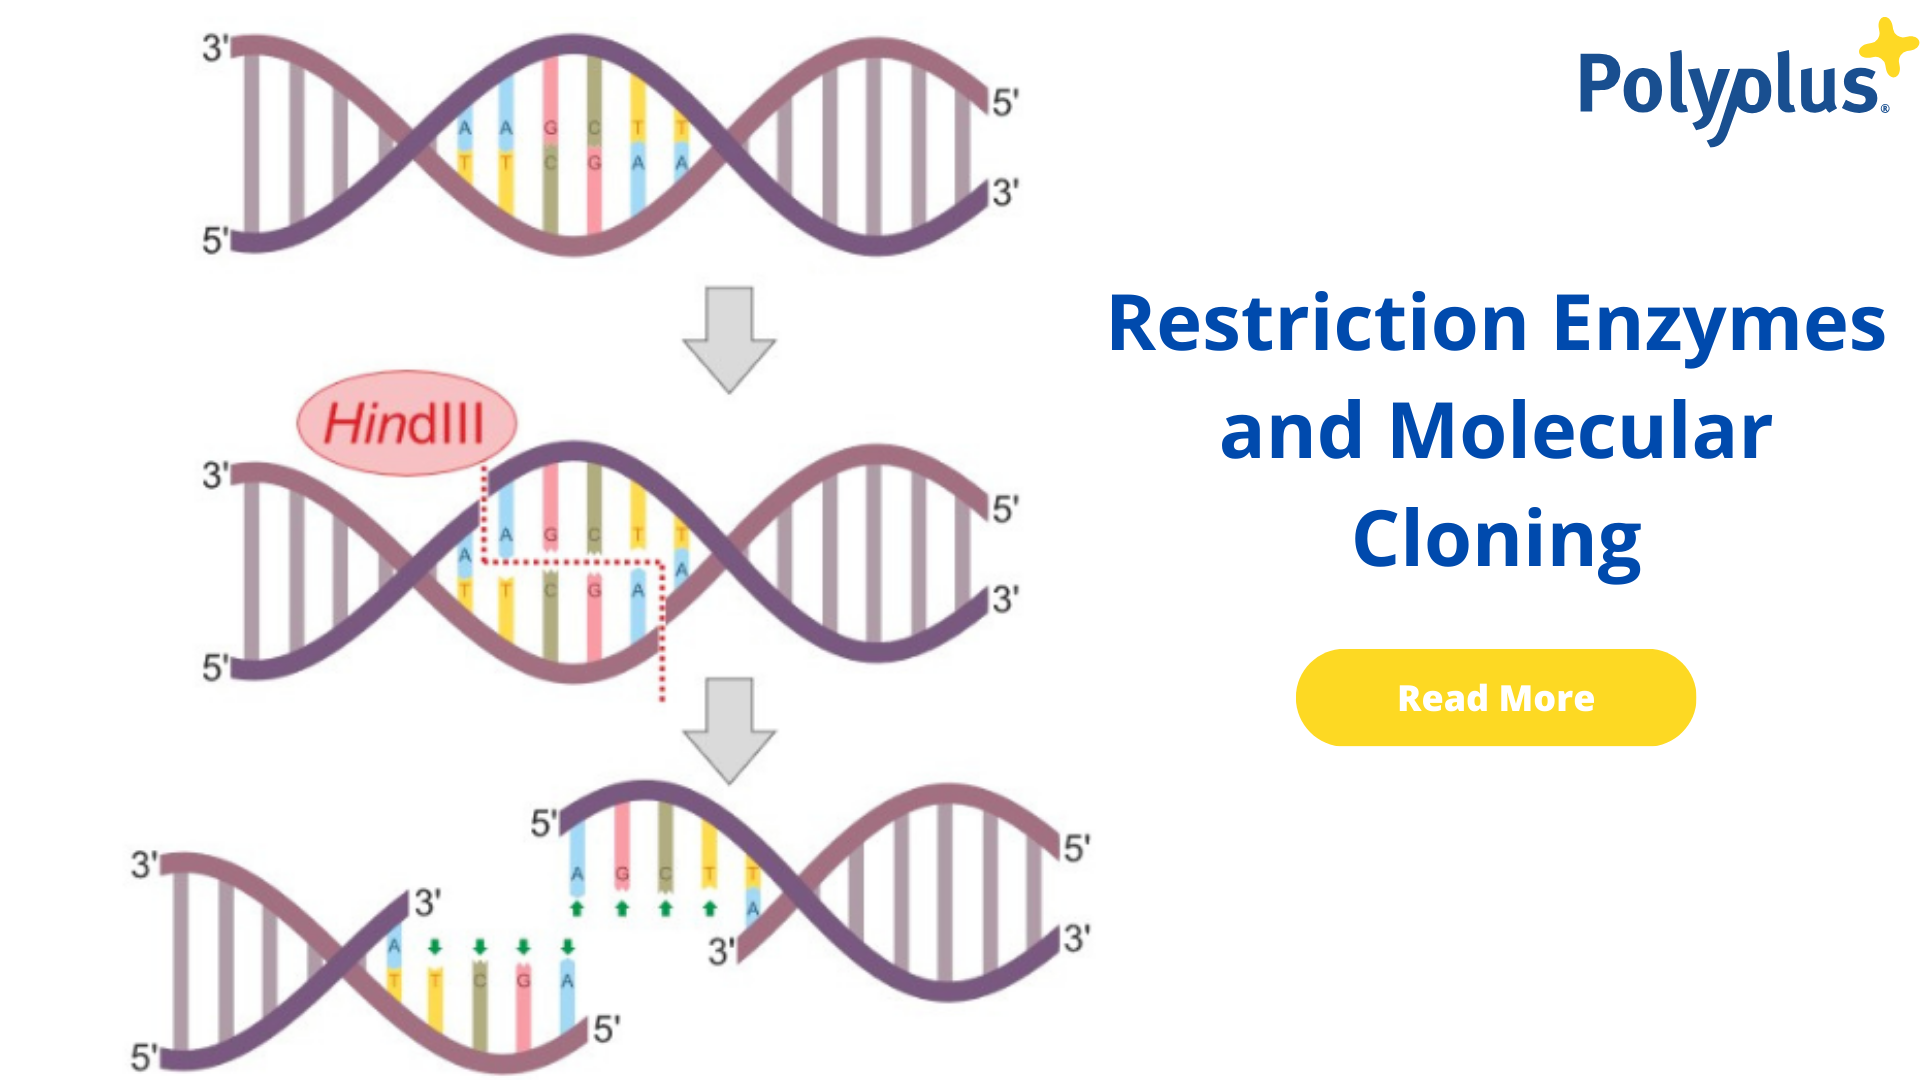 Restriction Enzymes and Molecular Cloning